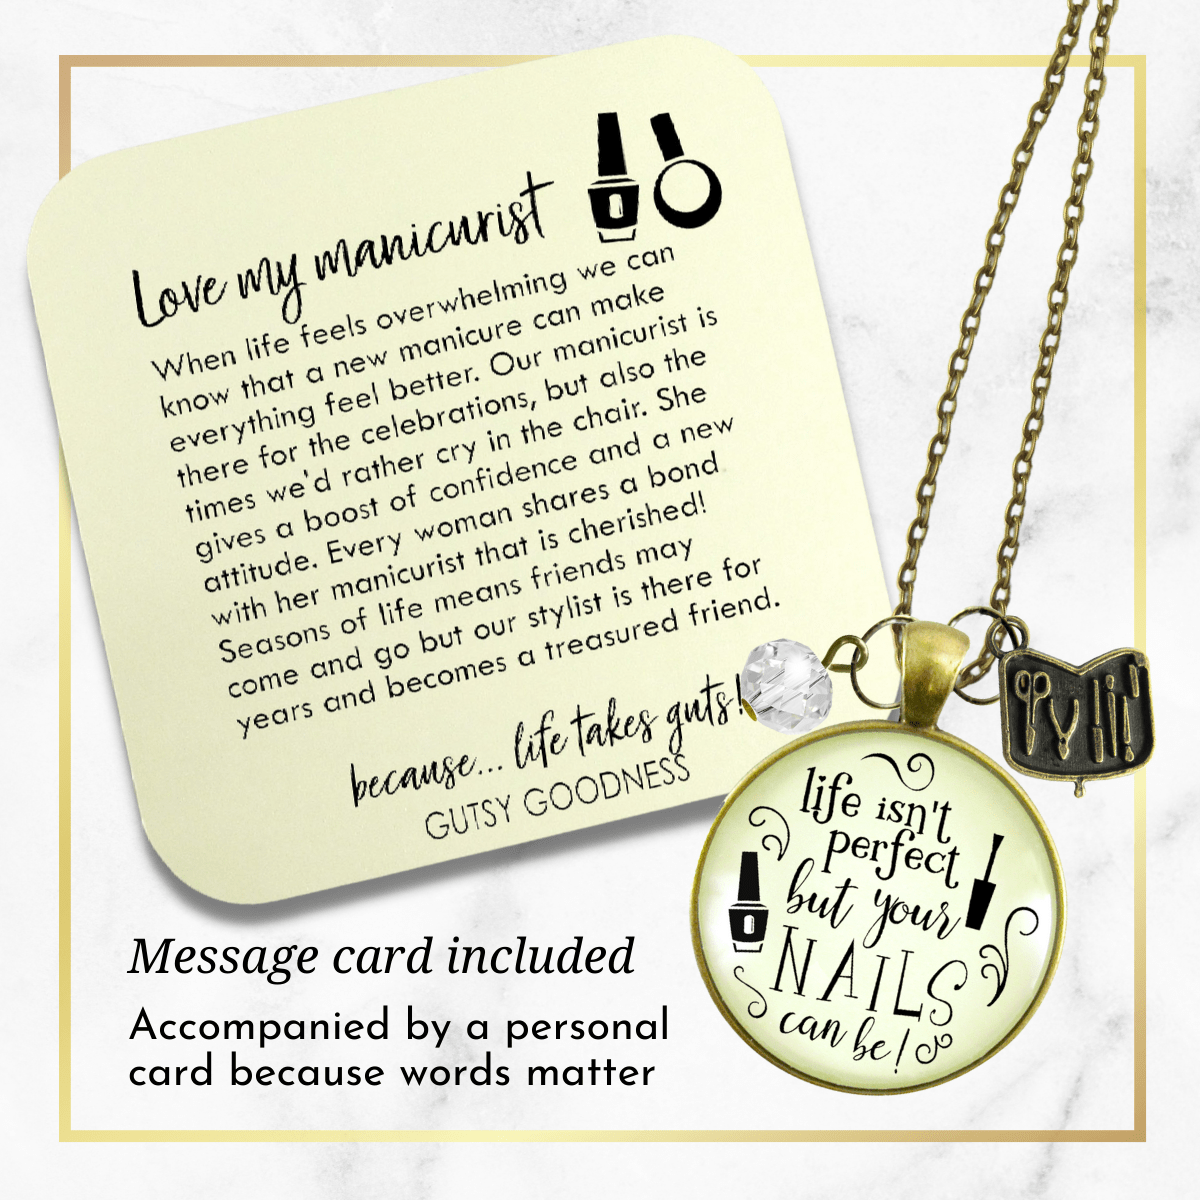 Gutsy Goodness Manicurist Gift Necklace Life Isn't Perfect Nails Beautician Jewelry Gift - Gutsy Goodness Handmade Jewelry;Manicurist Gift Necklace Life Isn't Perfect Nails Beautician Jewelry Gift - Gutsy Goodness Handmade Jewelry Gifts